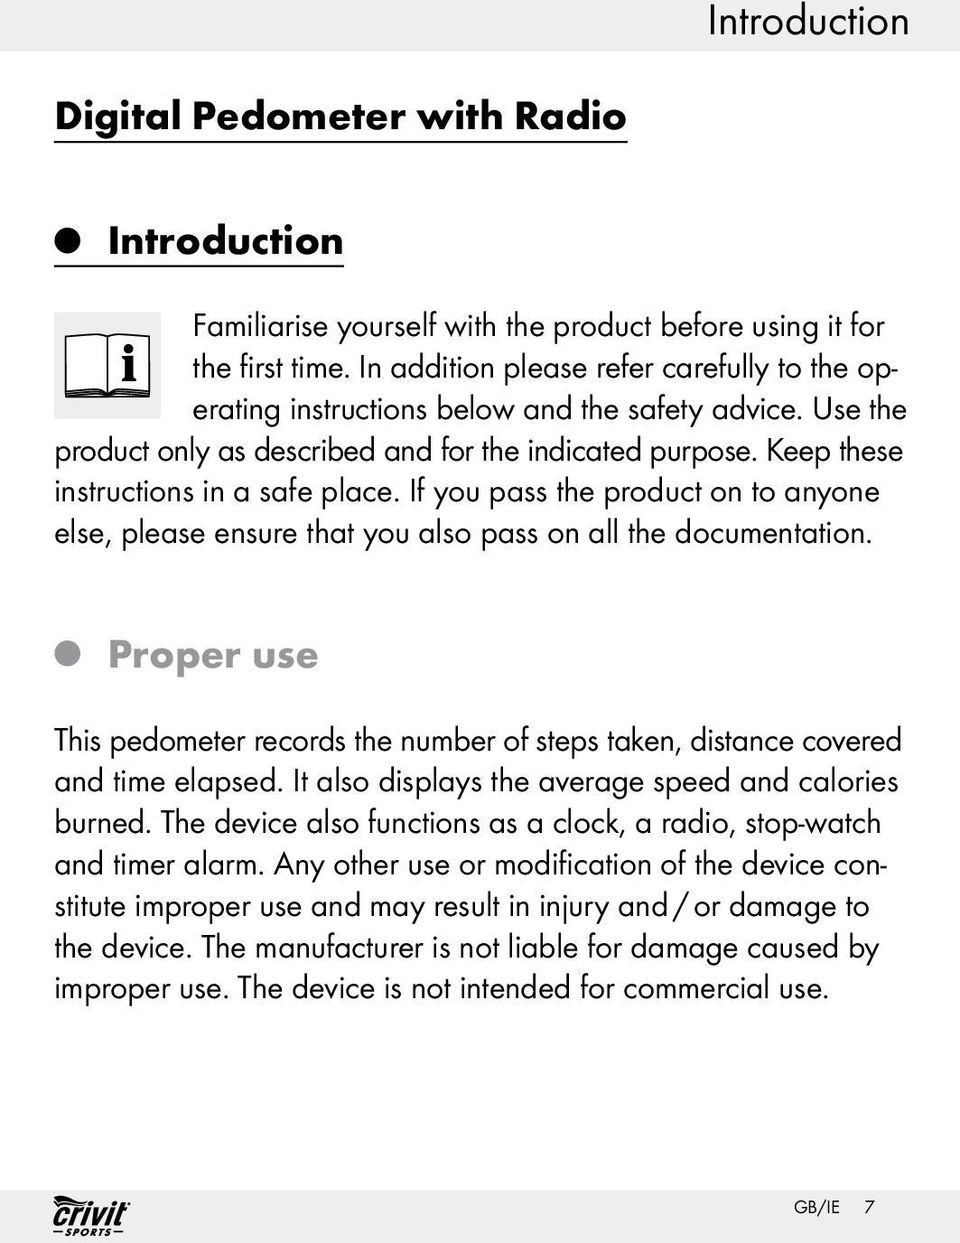 If you pass the product on to anyone else, please ensure that you also pass on all the documentation. Q Proper use This pedometer records the number of steps taken, distance covered and time elapsed.